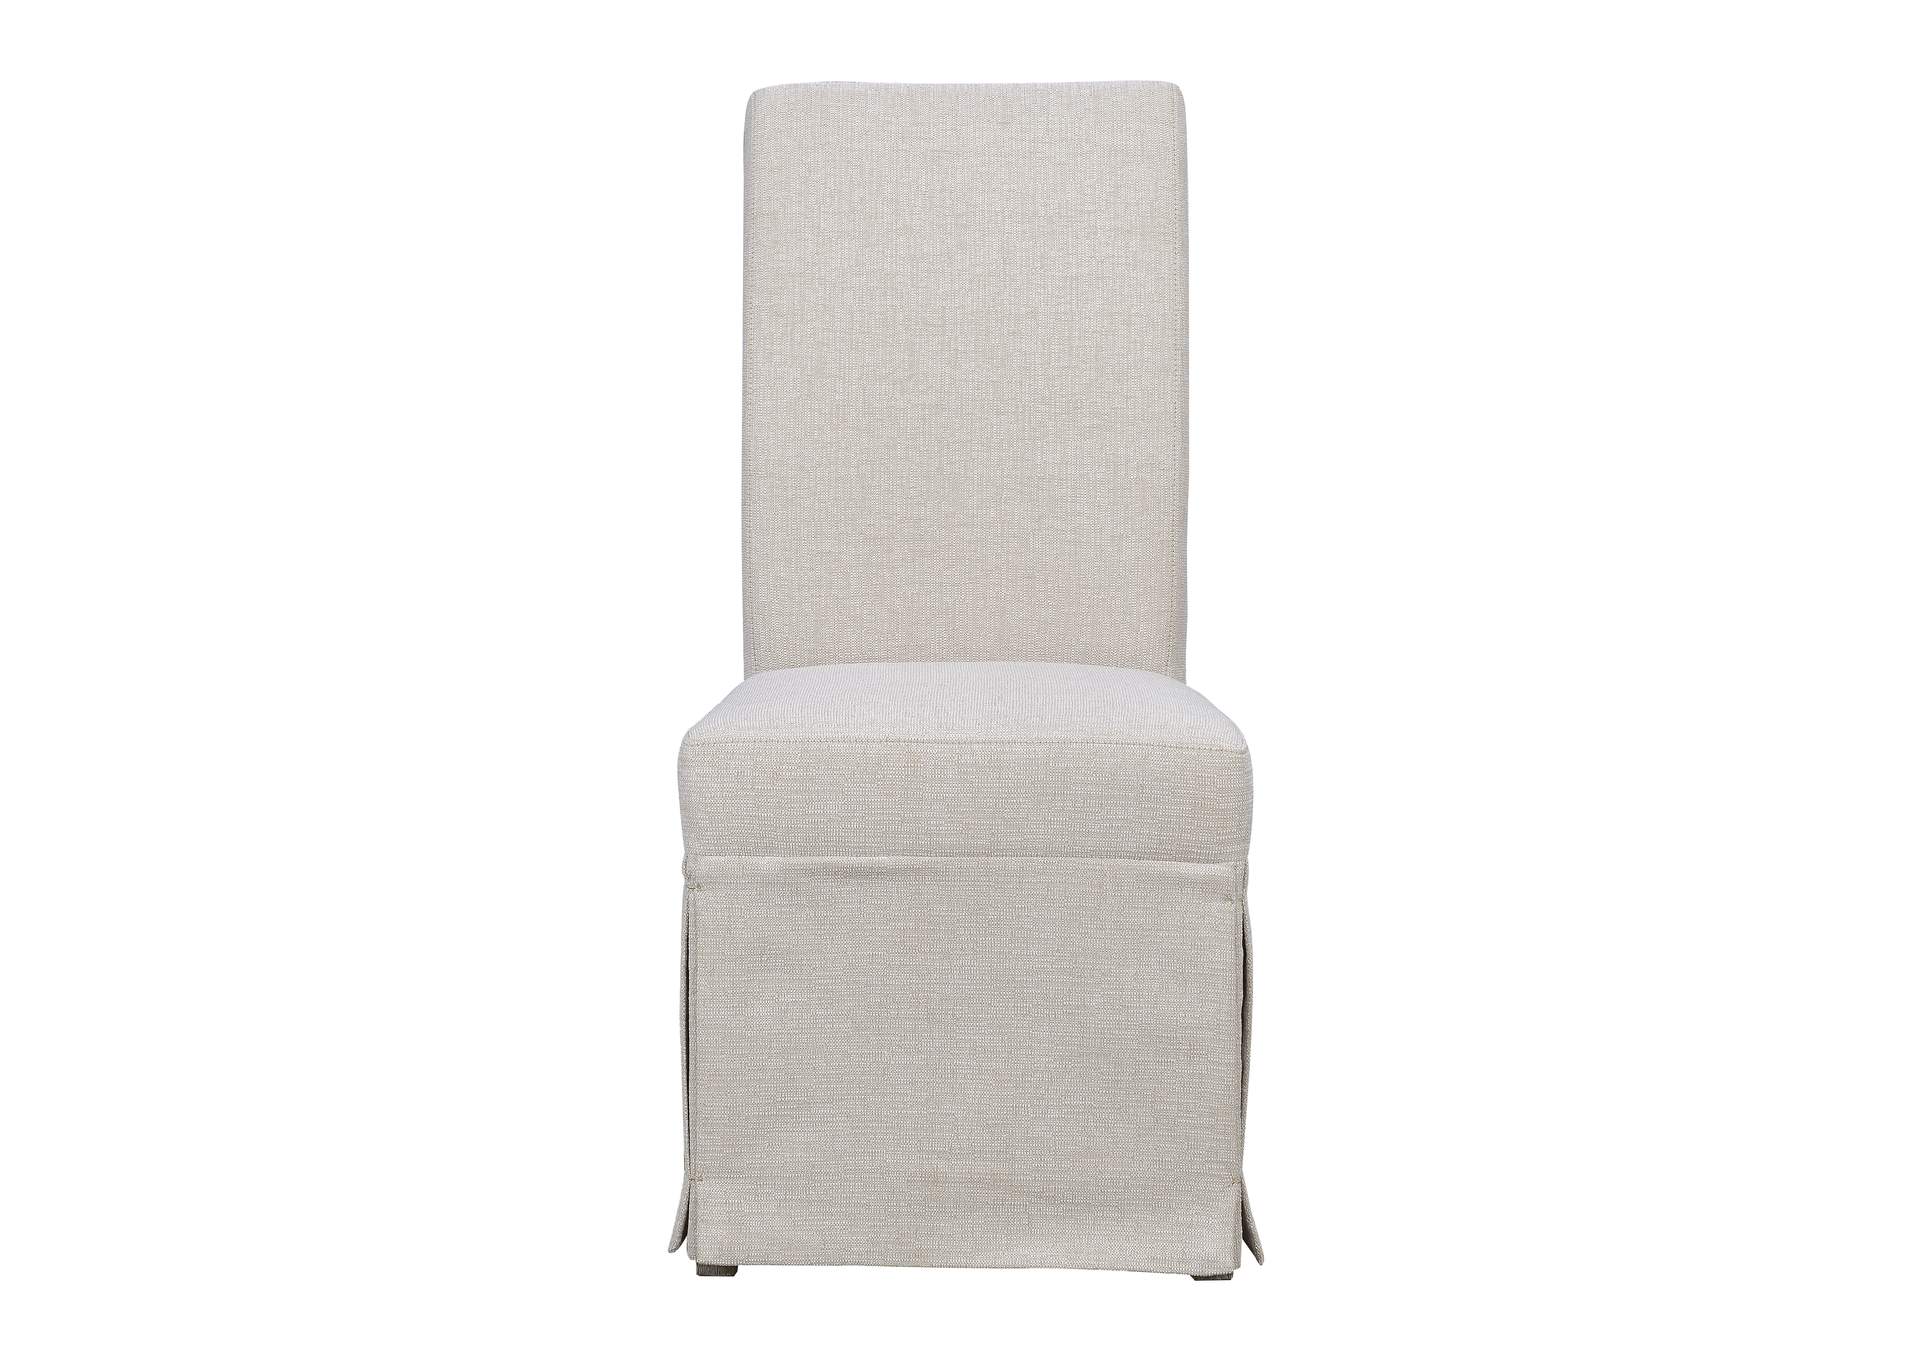 Paladin Linen Buff Upholstered Skirted, Upholstered Skirted Parsons Dining Chairs